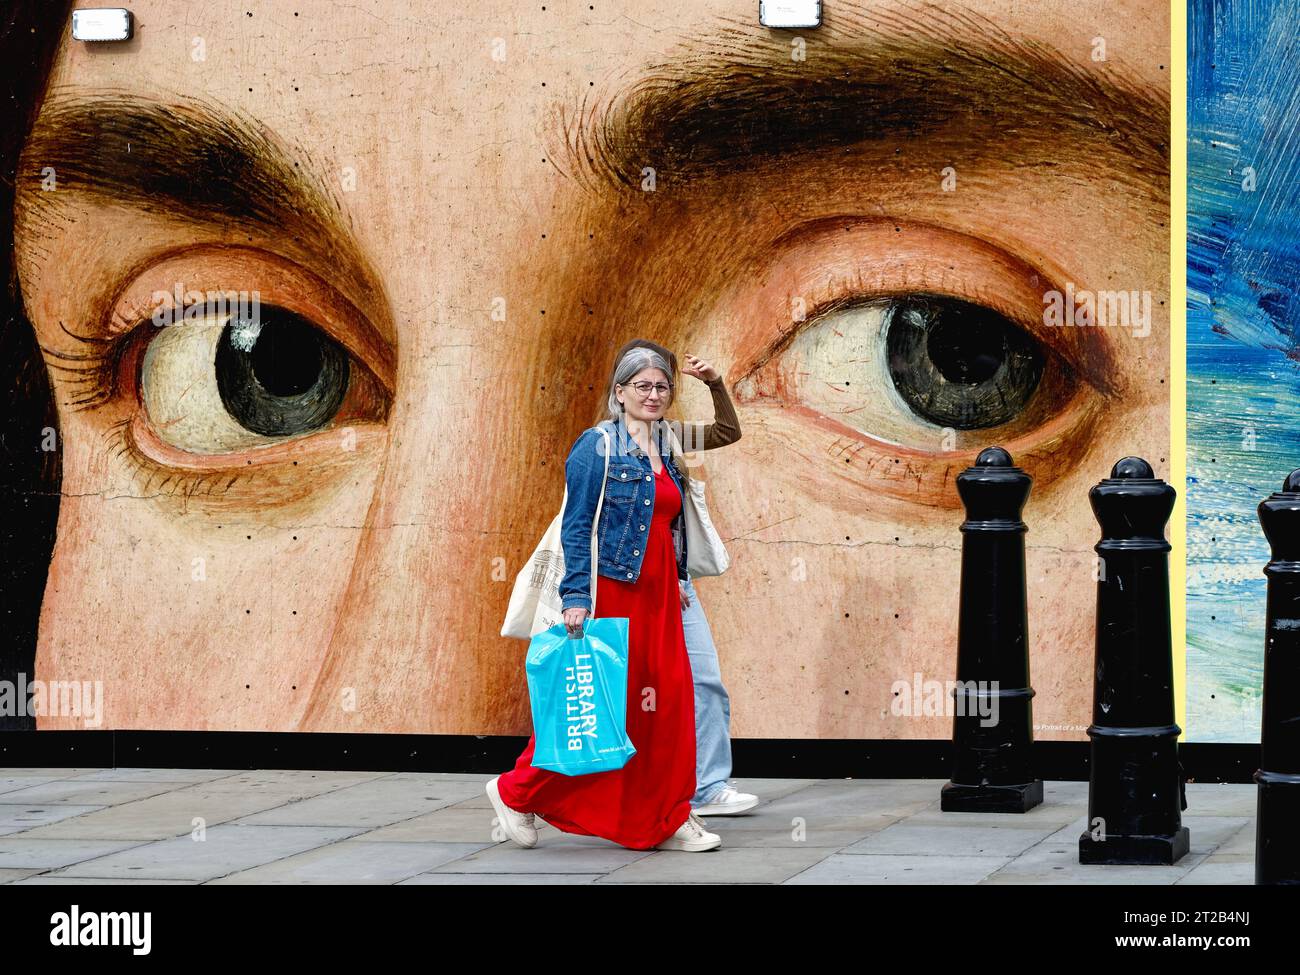 Two women walking by a close up of a pair of eyes from a painting by Antonello de Messina on a poster central London England UK Stock Photo